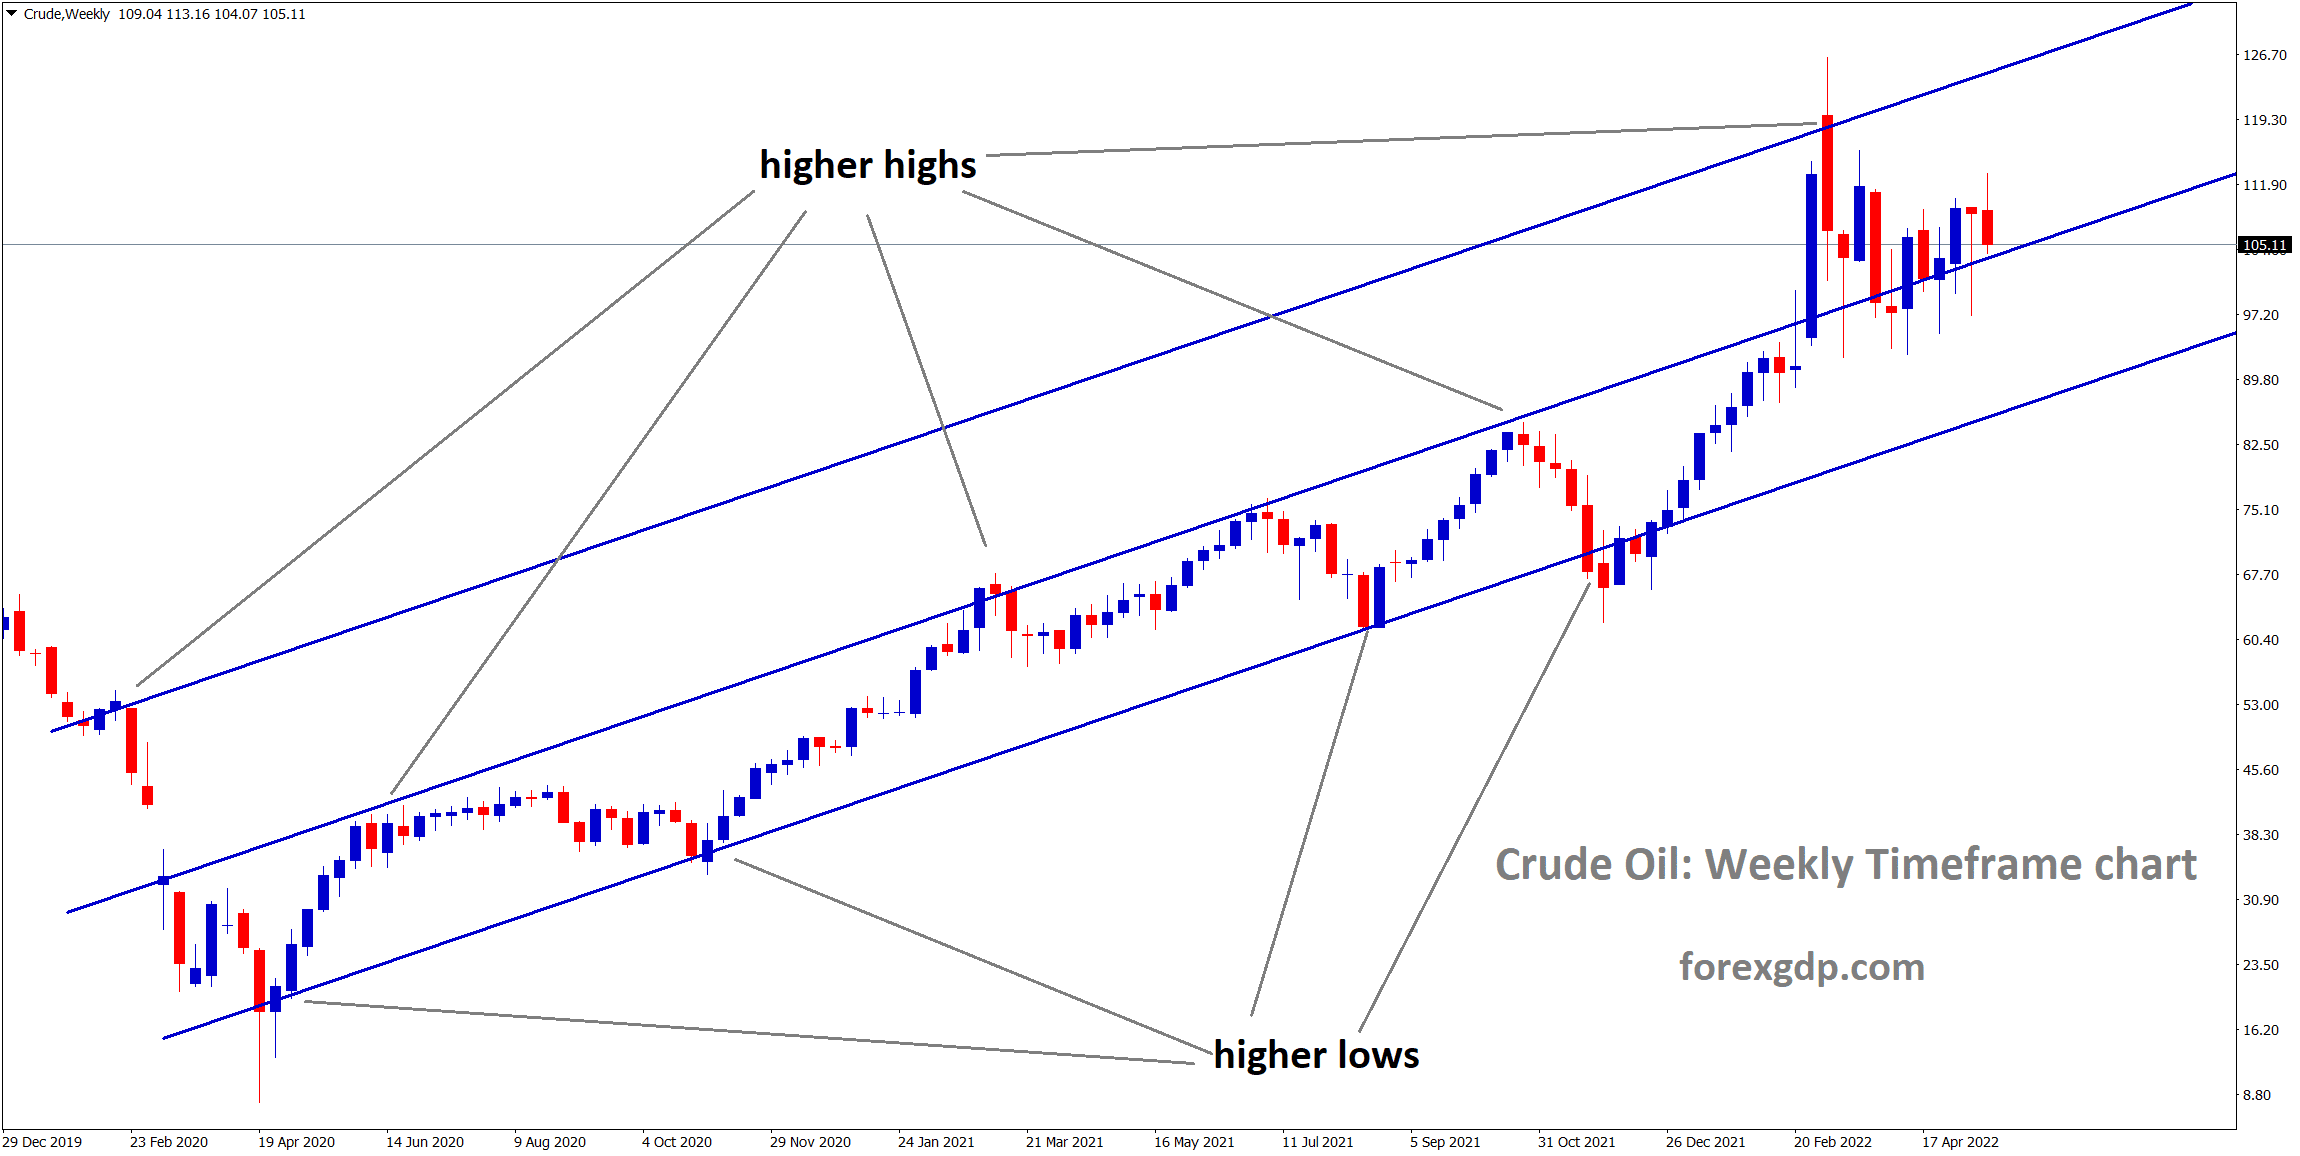 Crude Oil moving in a ascending channel and reached higher high area of the channel.